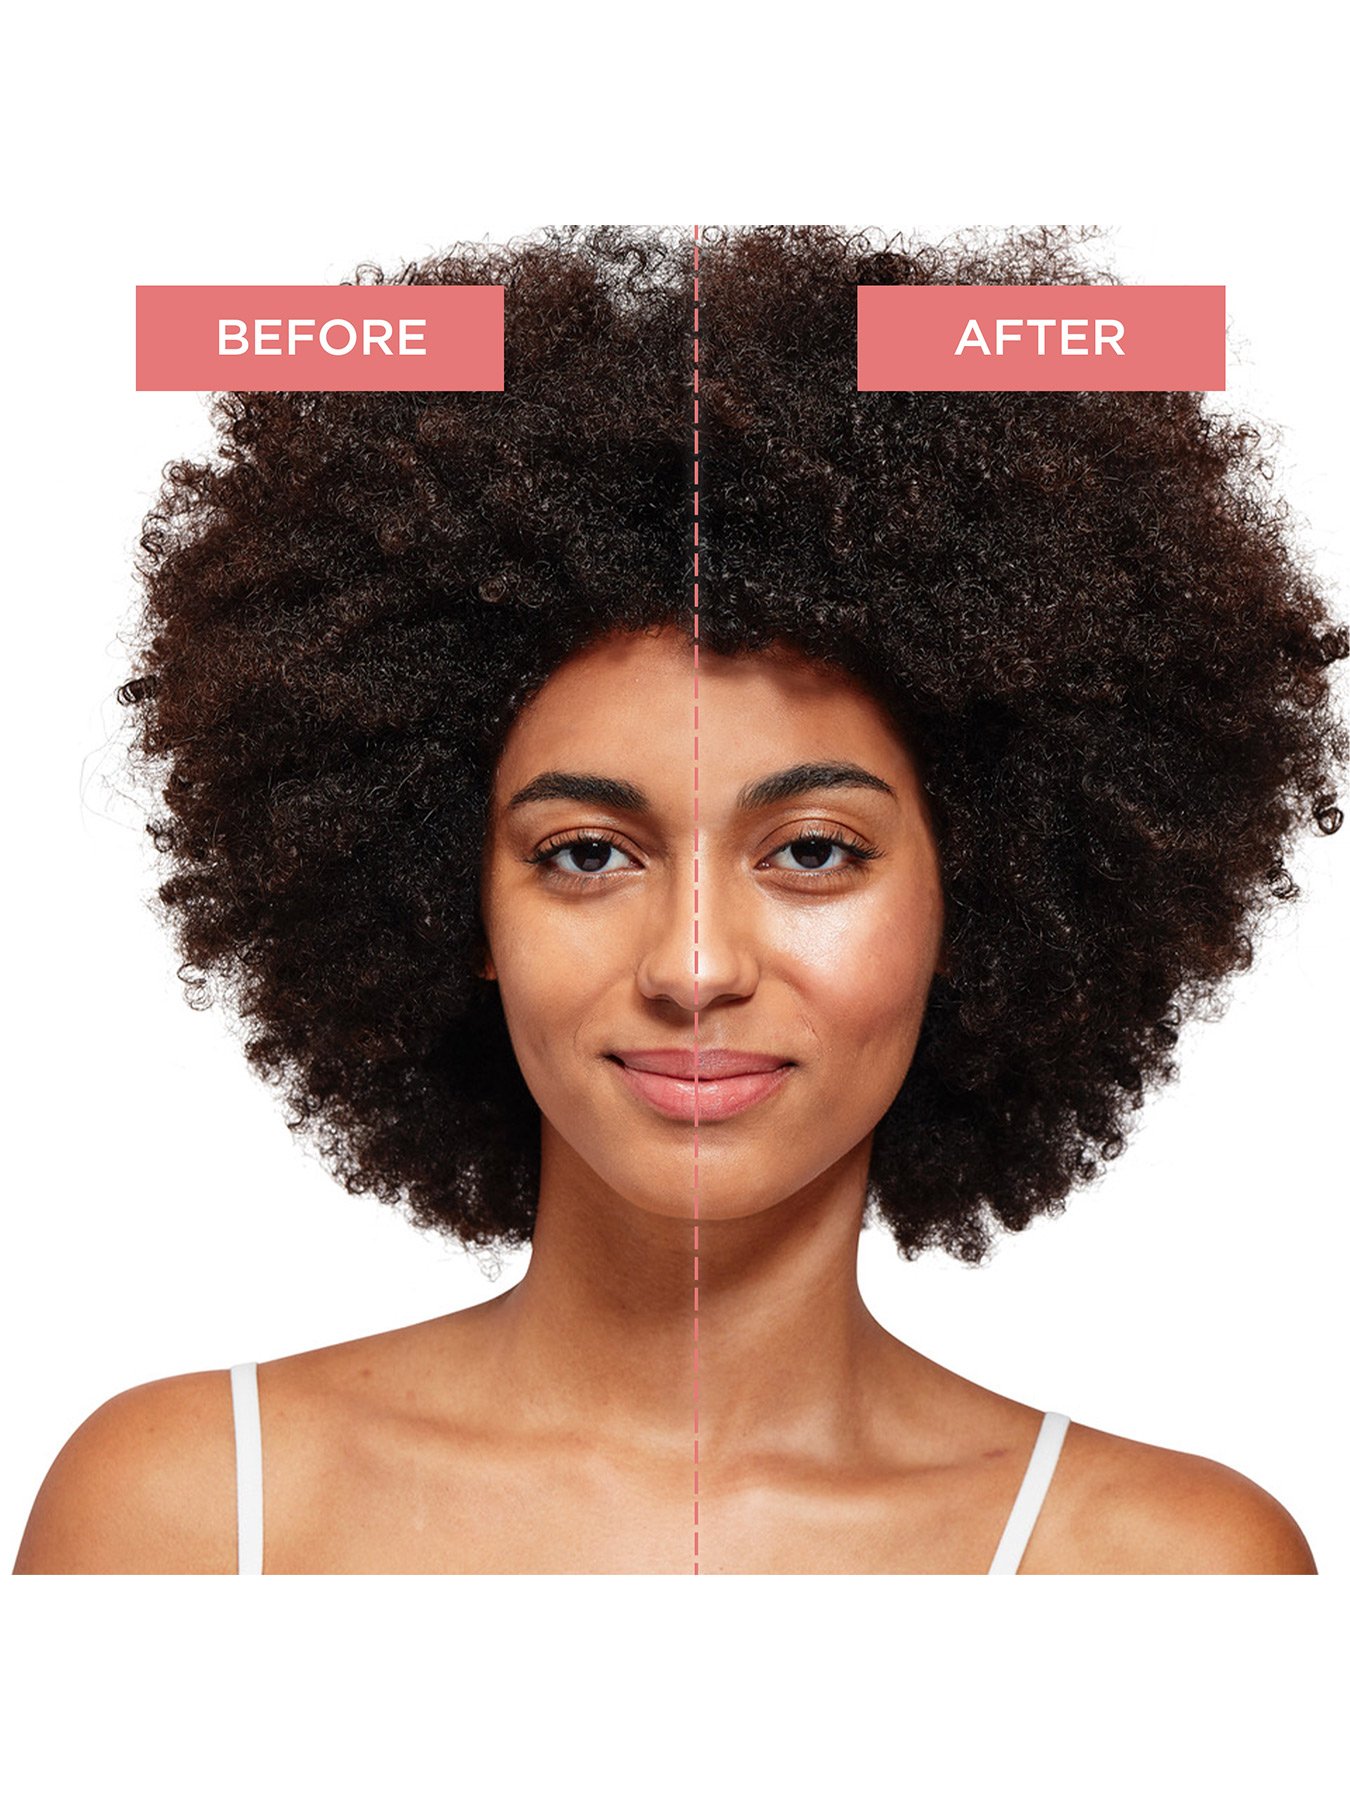 model's face showing before and after effects of Garnier Organic Rosy Glow 3in1 Youth Cream